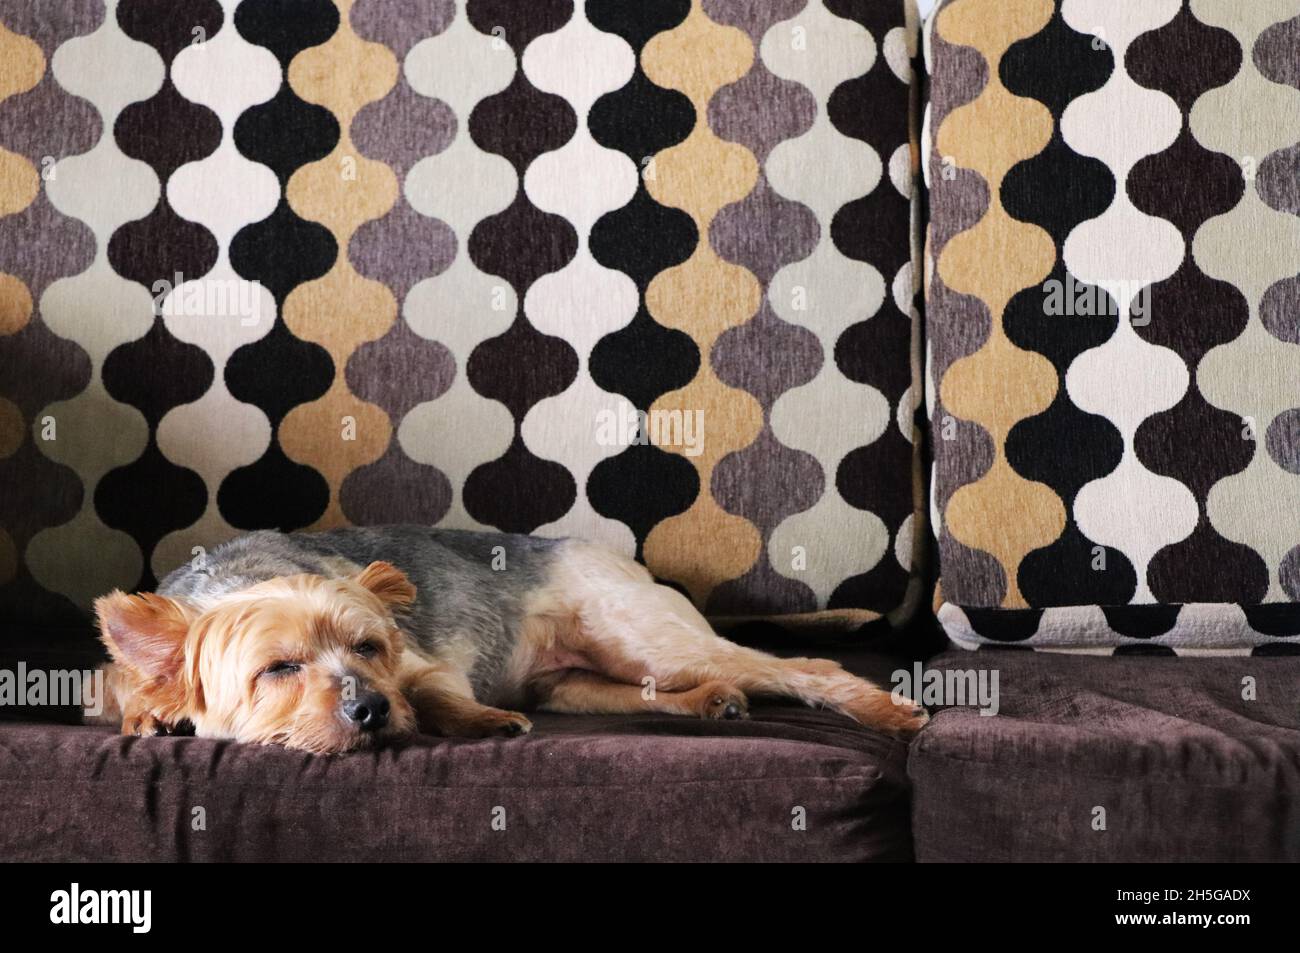 Yorkie Terrier napping on a retro style couch Stock Photo